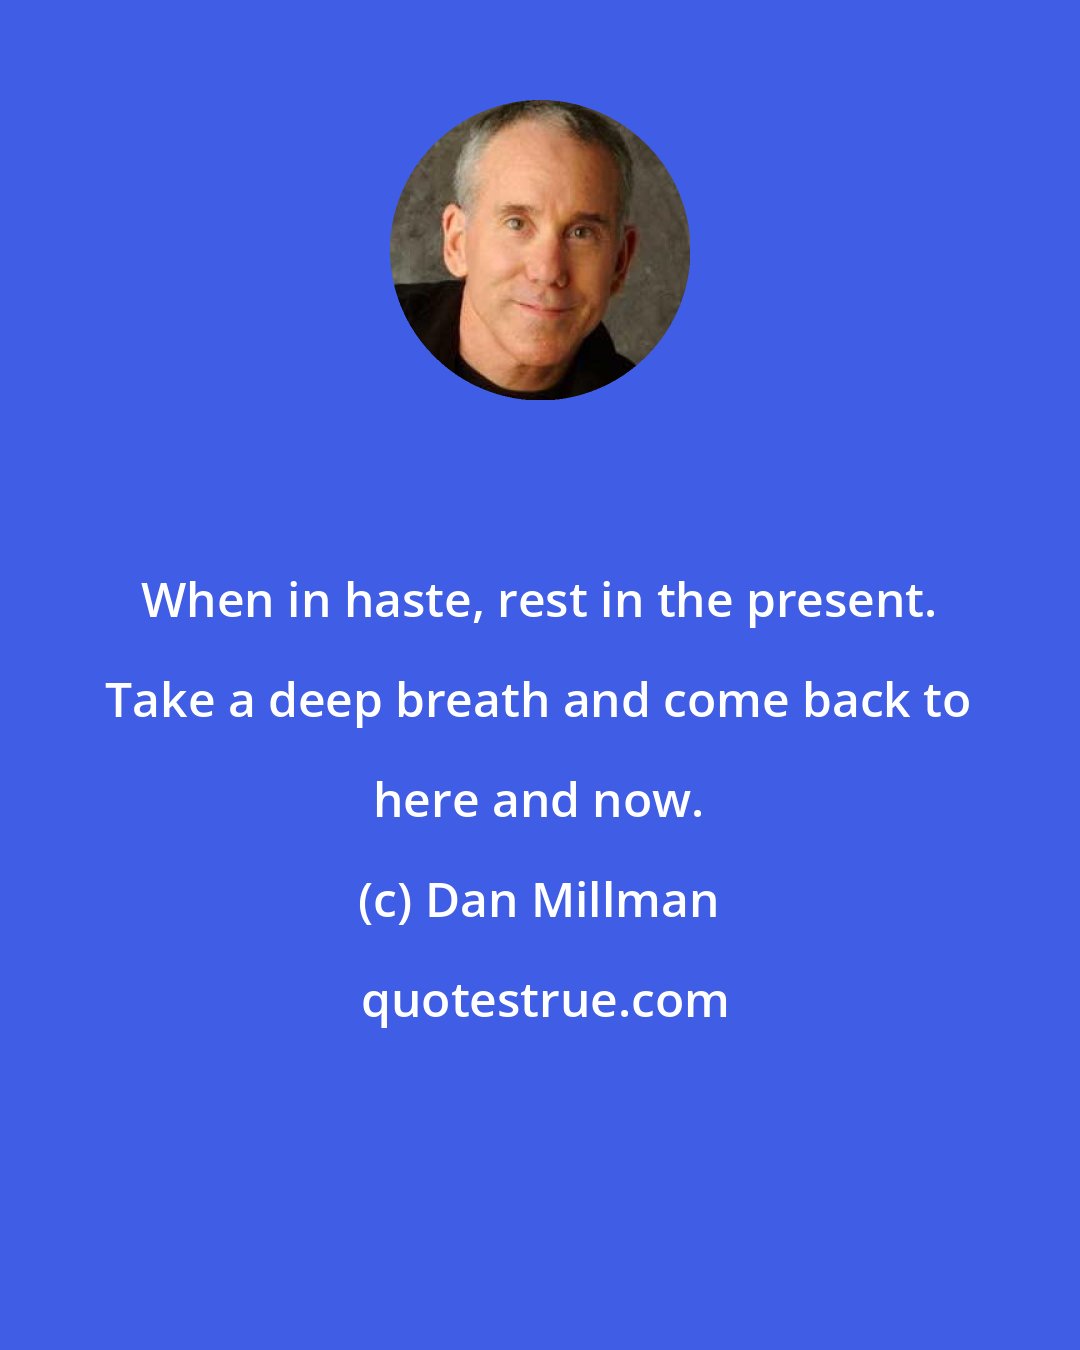 Dan Millman: When in haste, rest in the present. Take a deep breath and come back to here and now.